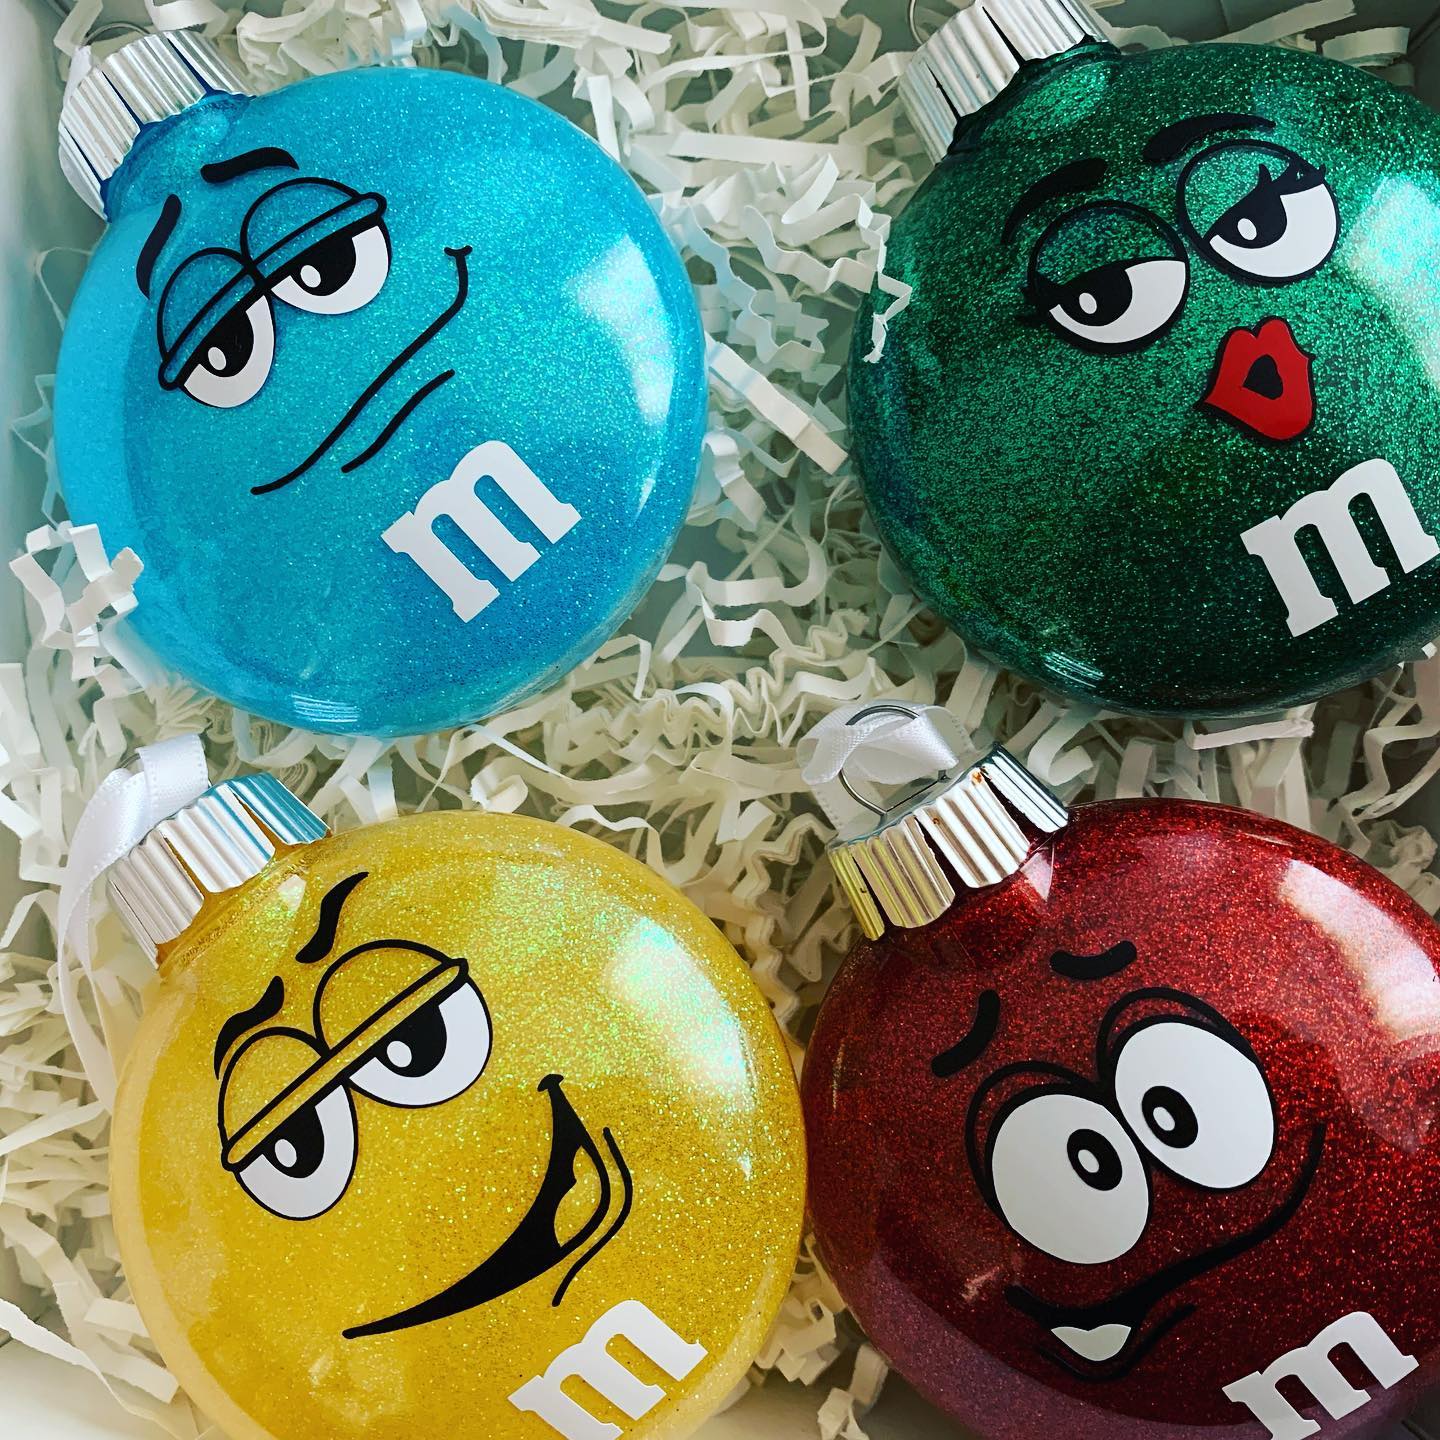 m&m's BLUE m&m Character Deluxe Metal Christmas Ornament NEW